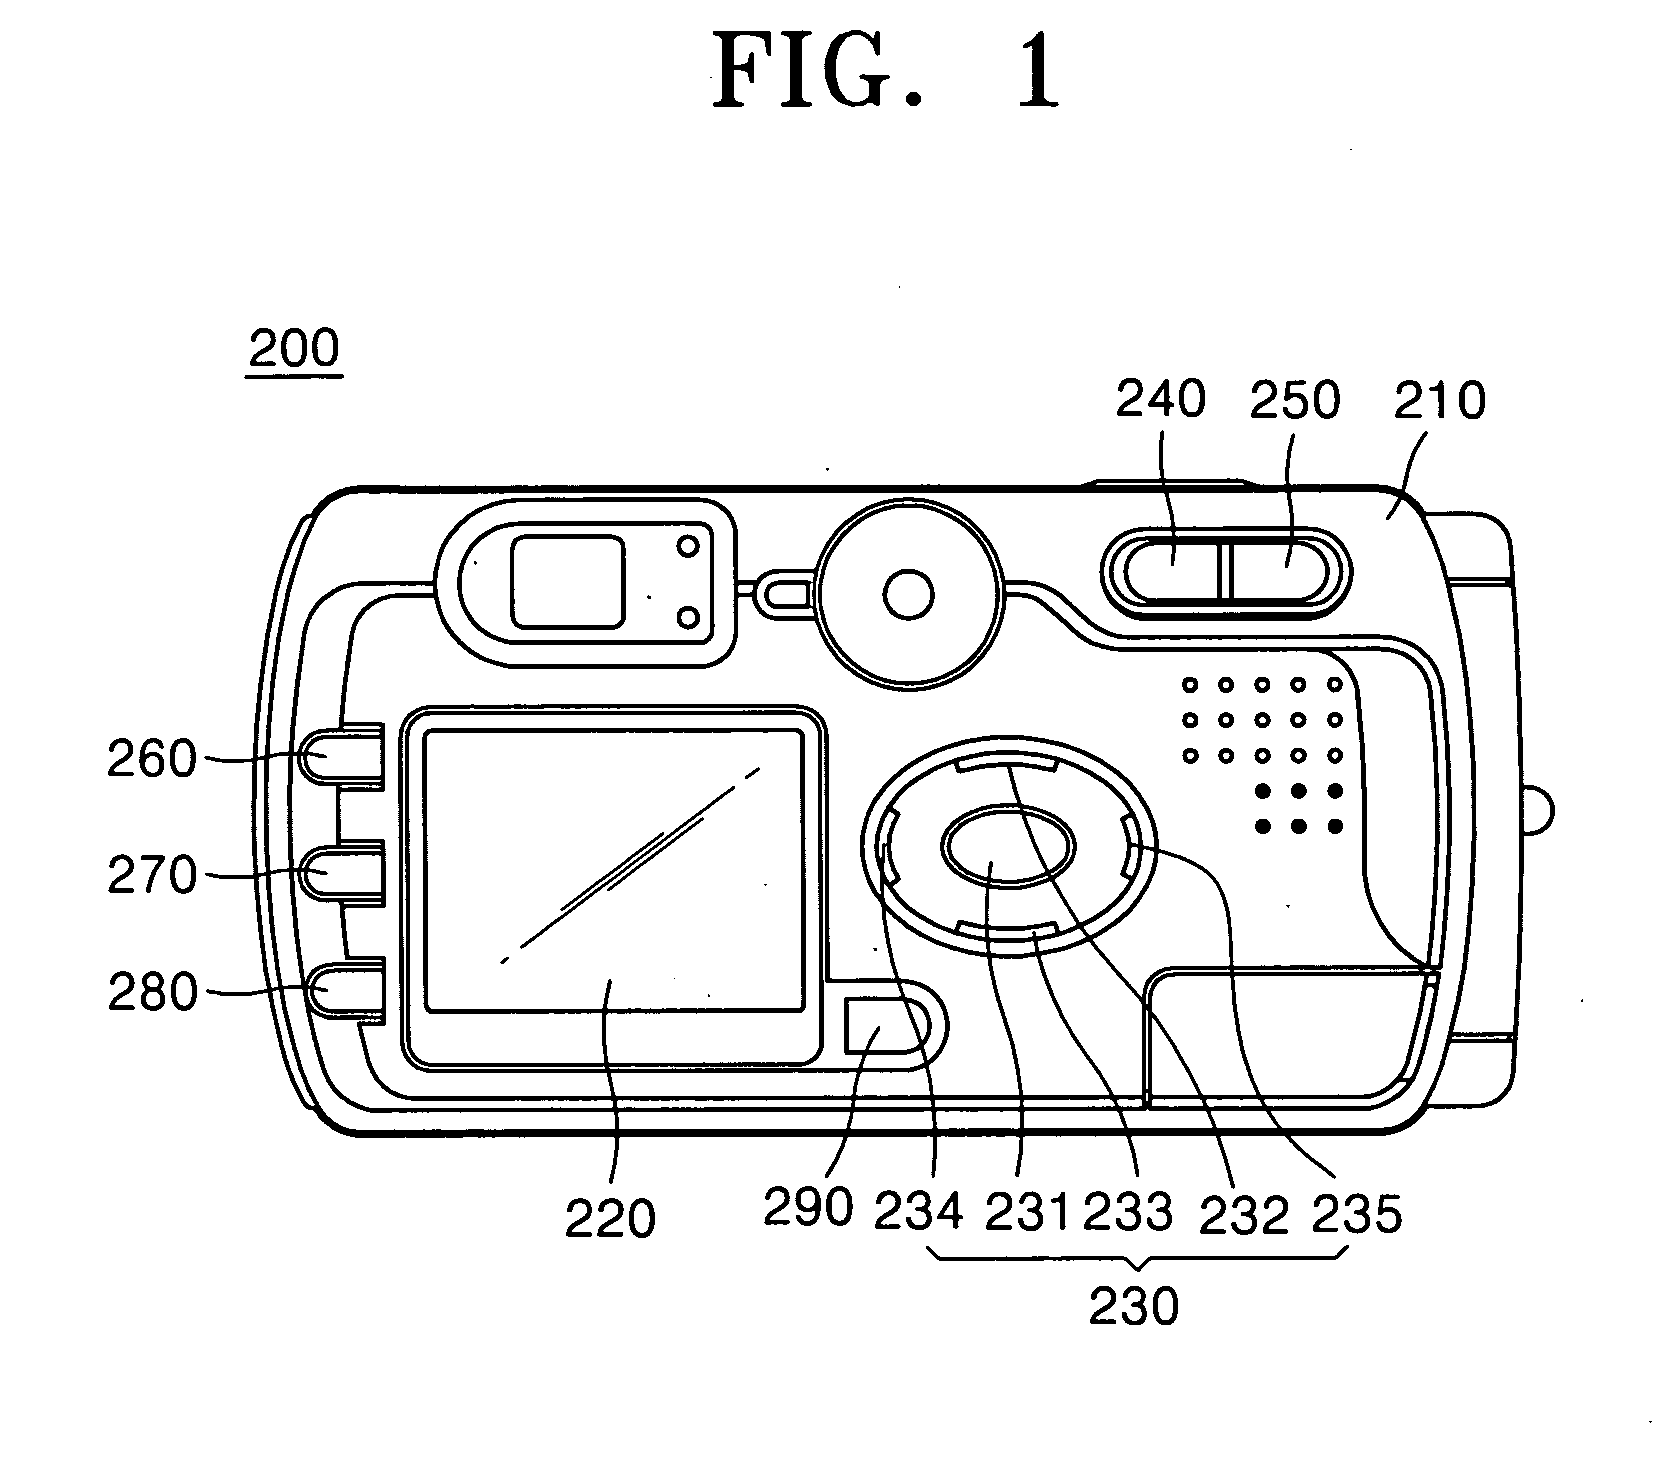 Method of inputting information into a mobile digital device